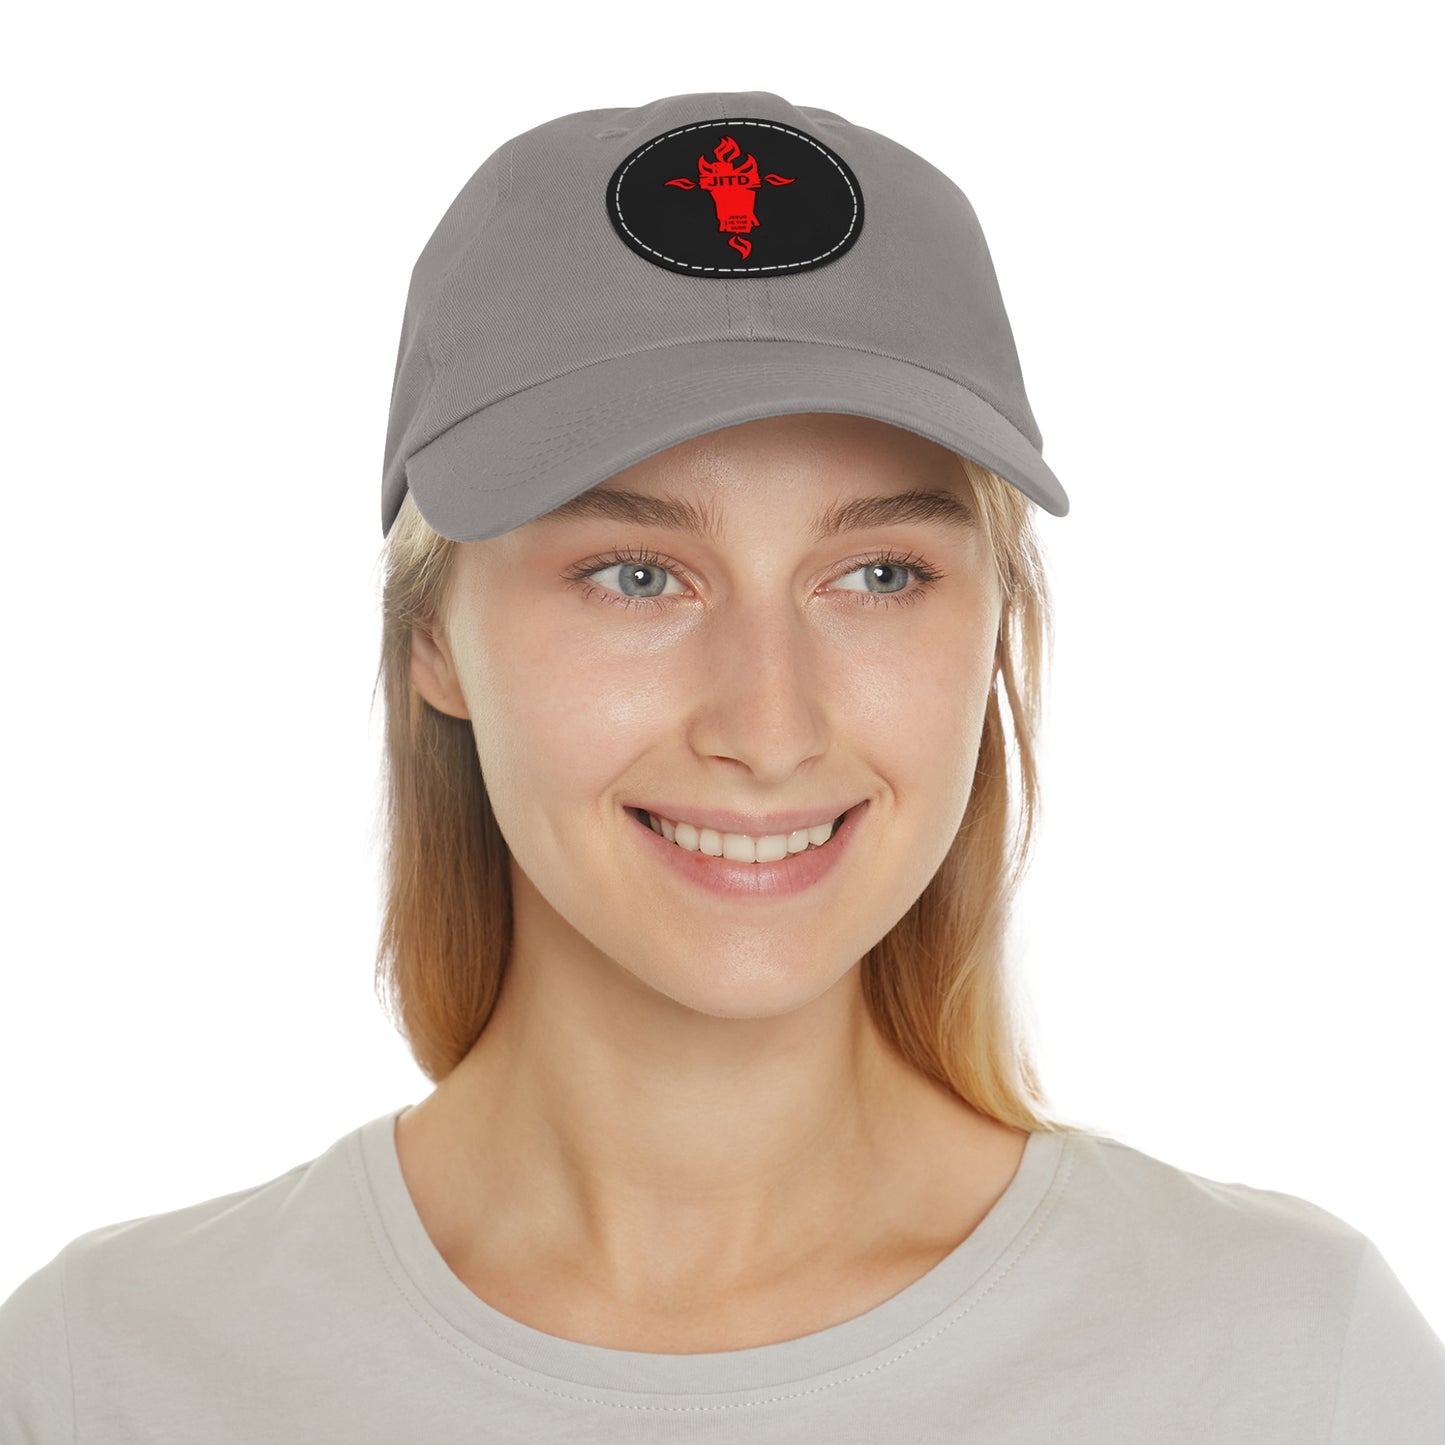 JITD FIRE CROSS HAT WITH LEATHER PATCH